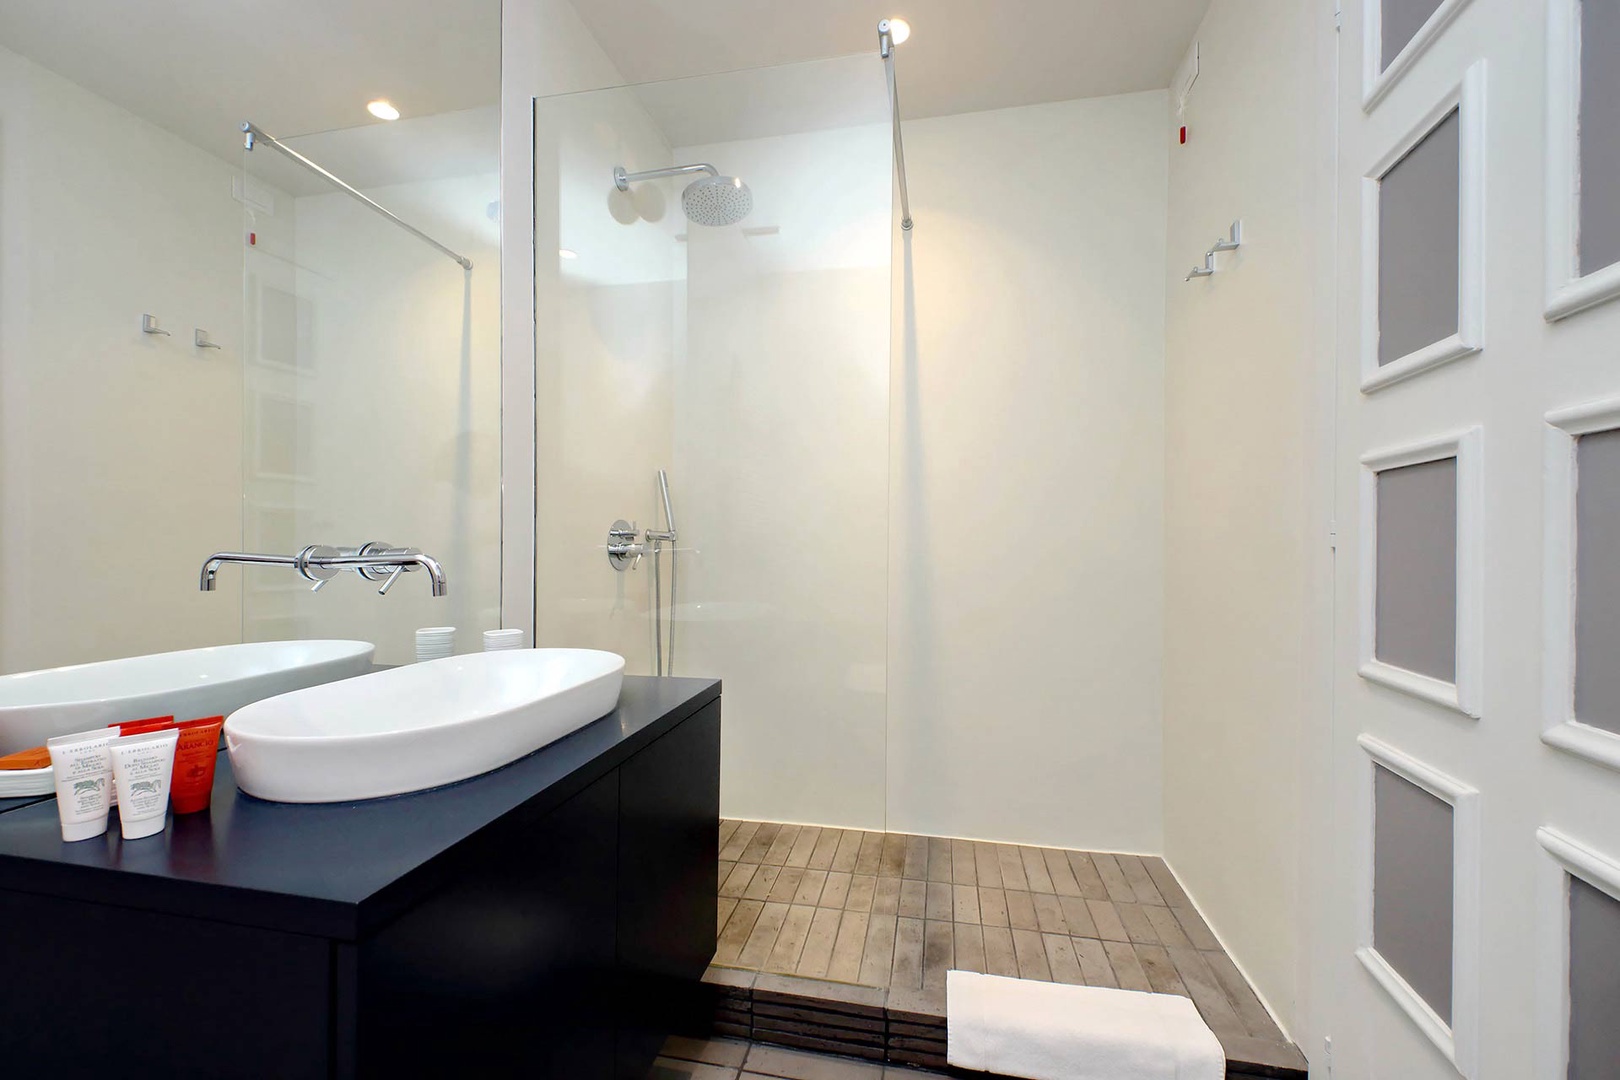 Four bathrooms in total in this property, making it convenient for all guests.